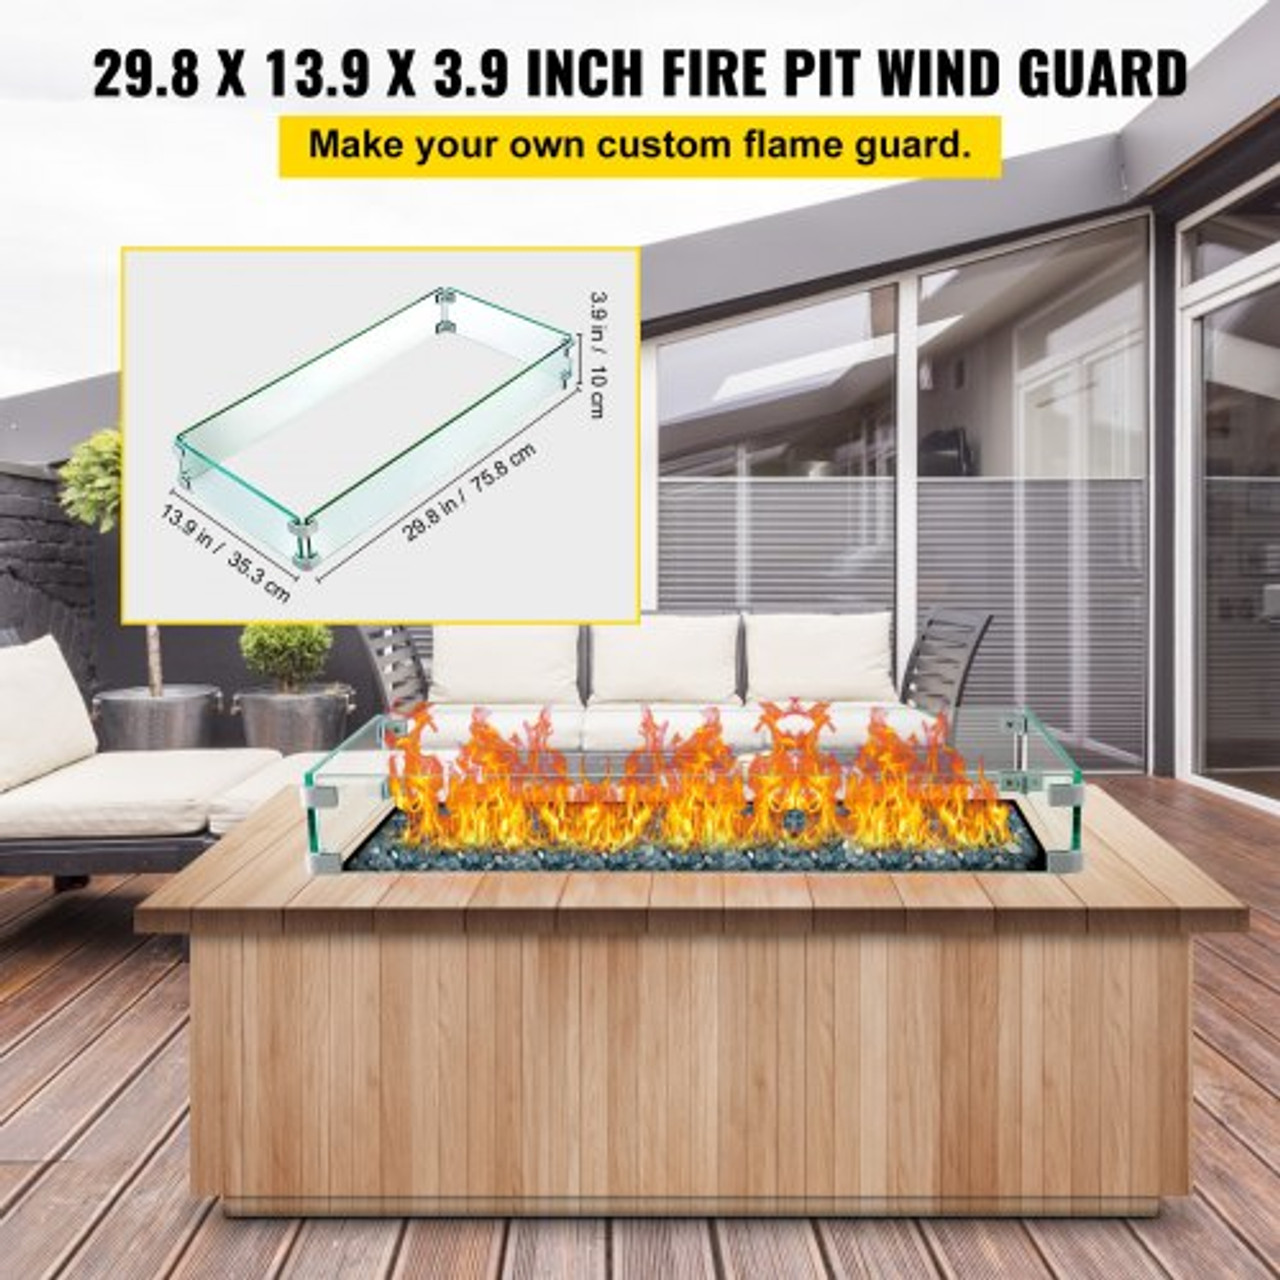 Fire Pit Wind Guard Fire Pit Tempered Glass Wind Guard Fence (29.5 x 13.6 x 4 Inch)